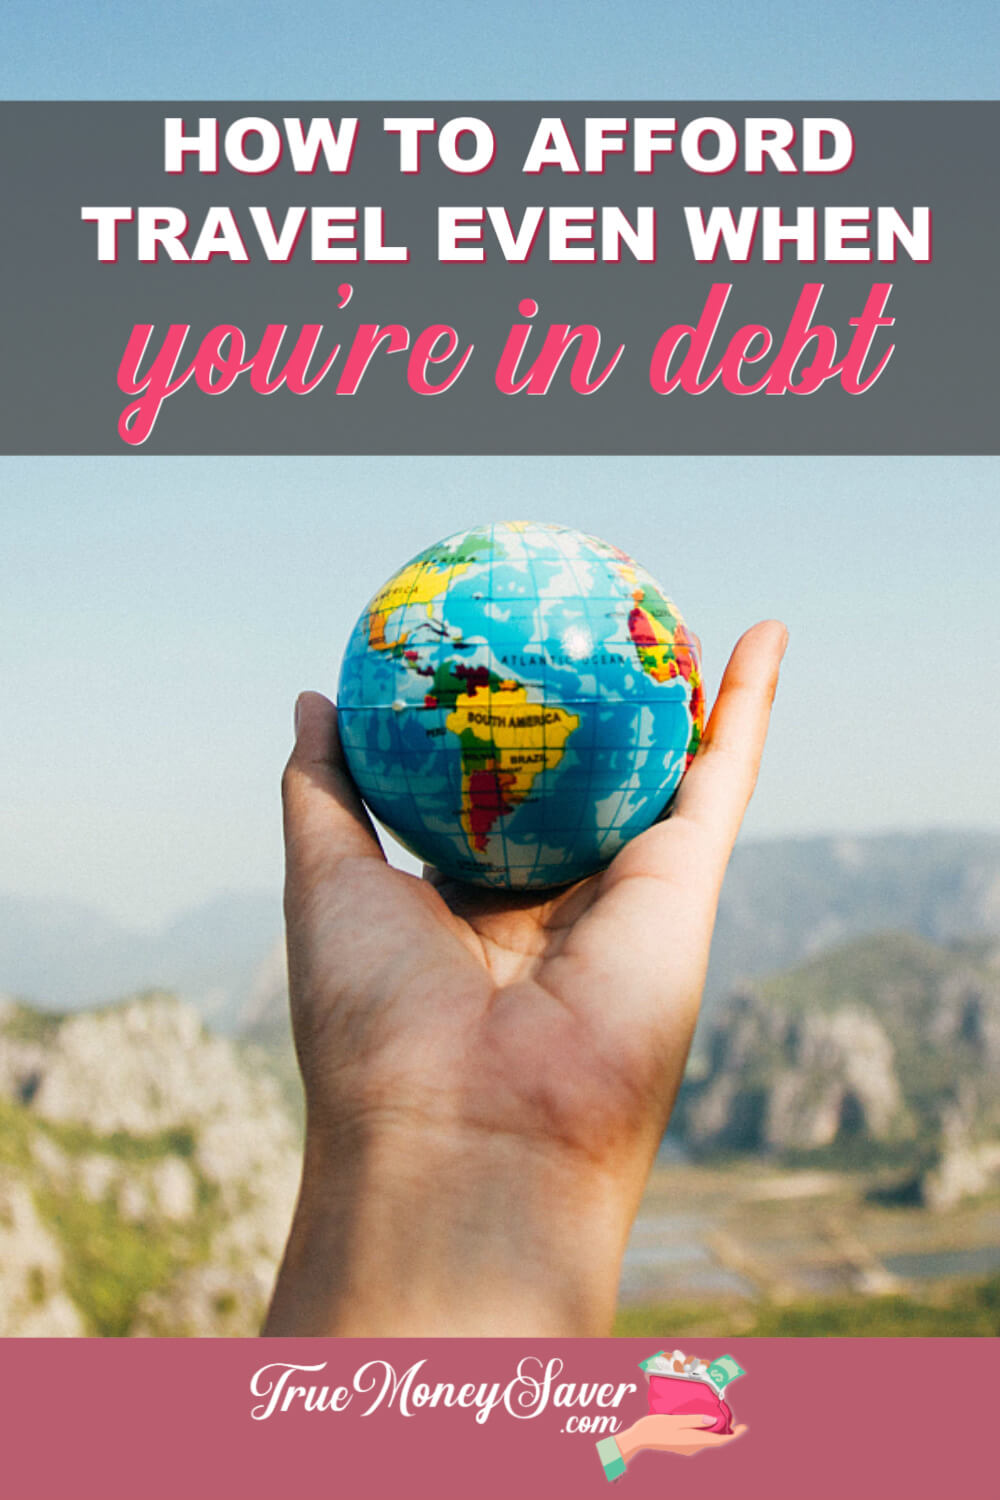 How To Afford Travel Even When You’re In Debt